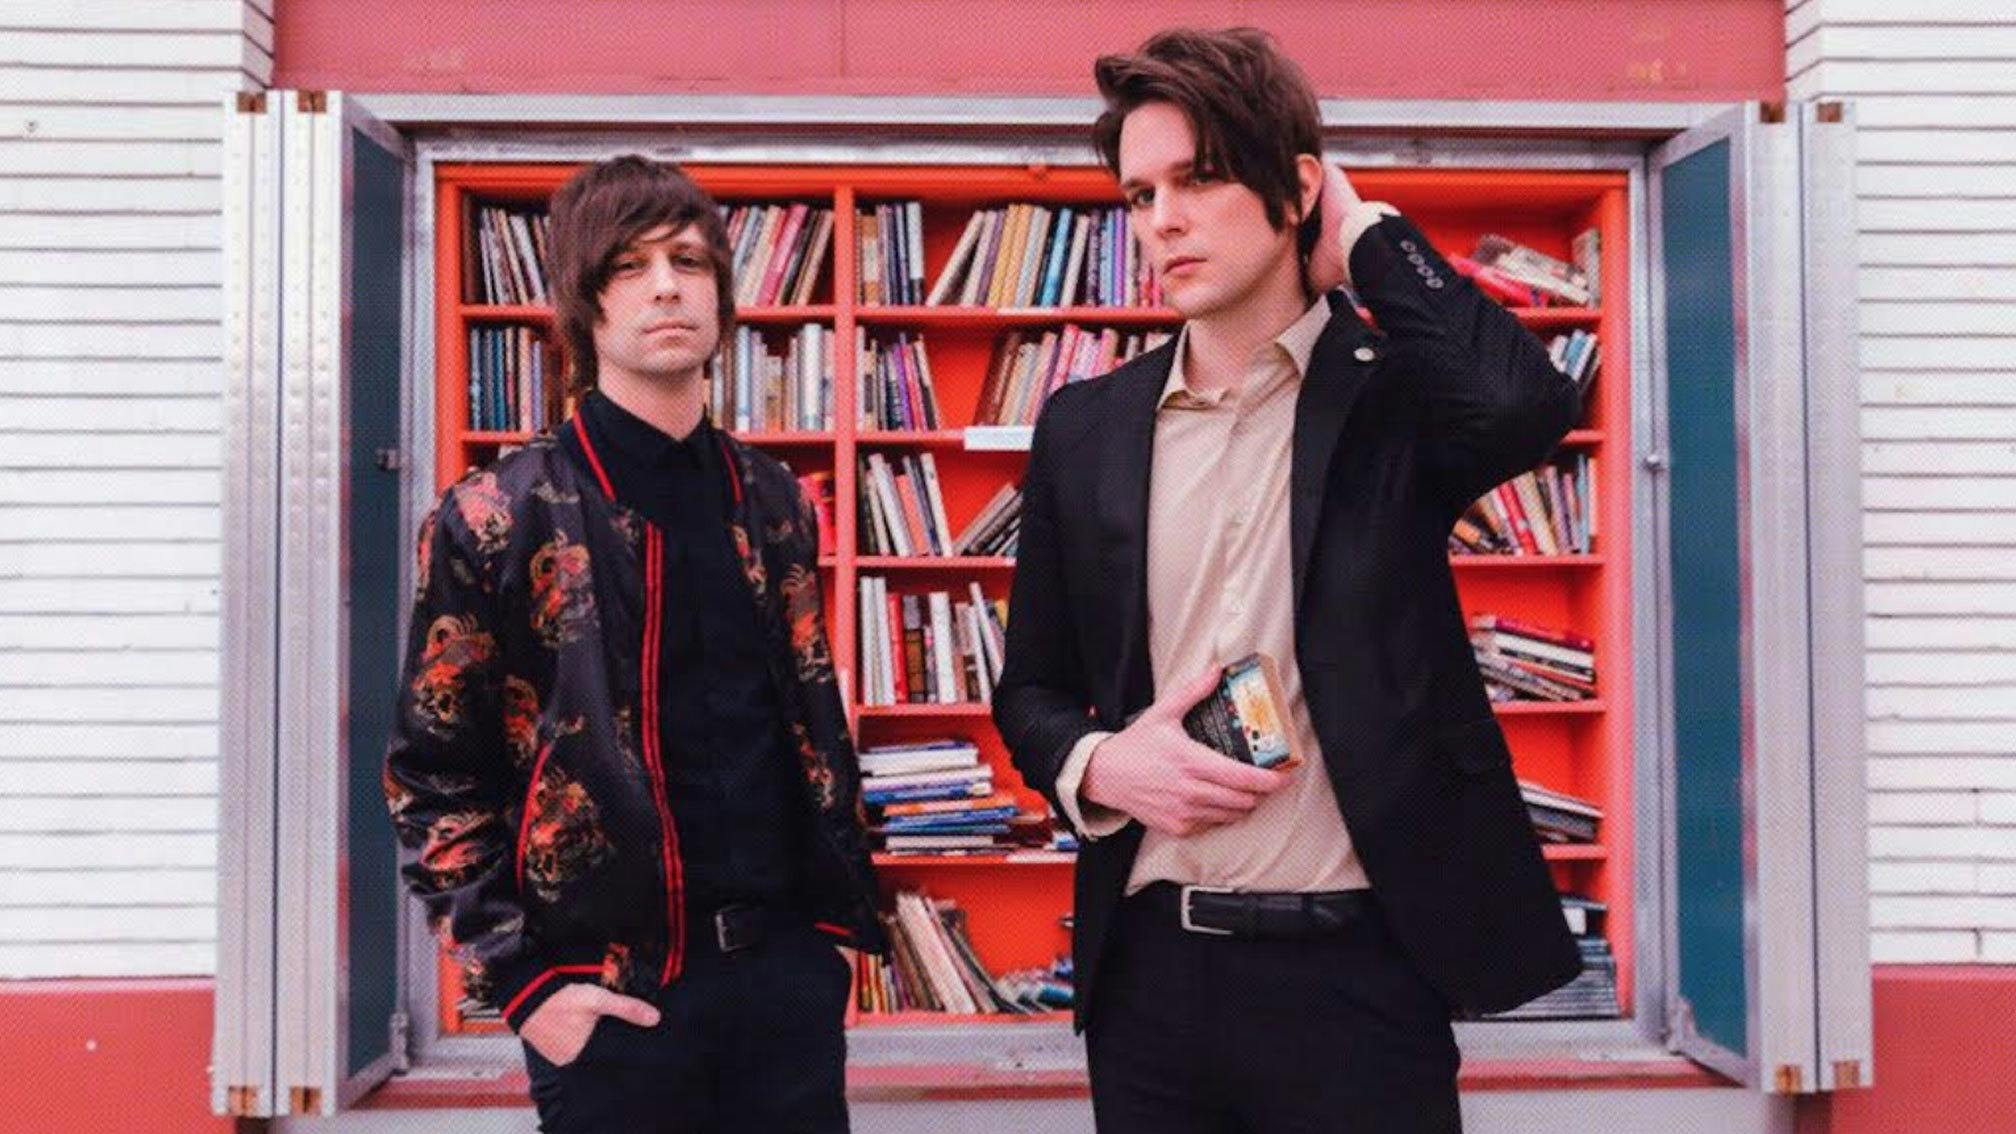 iDKHOW announce 2022 The Thought Reform Tour